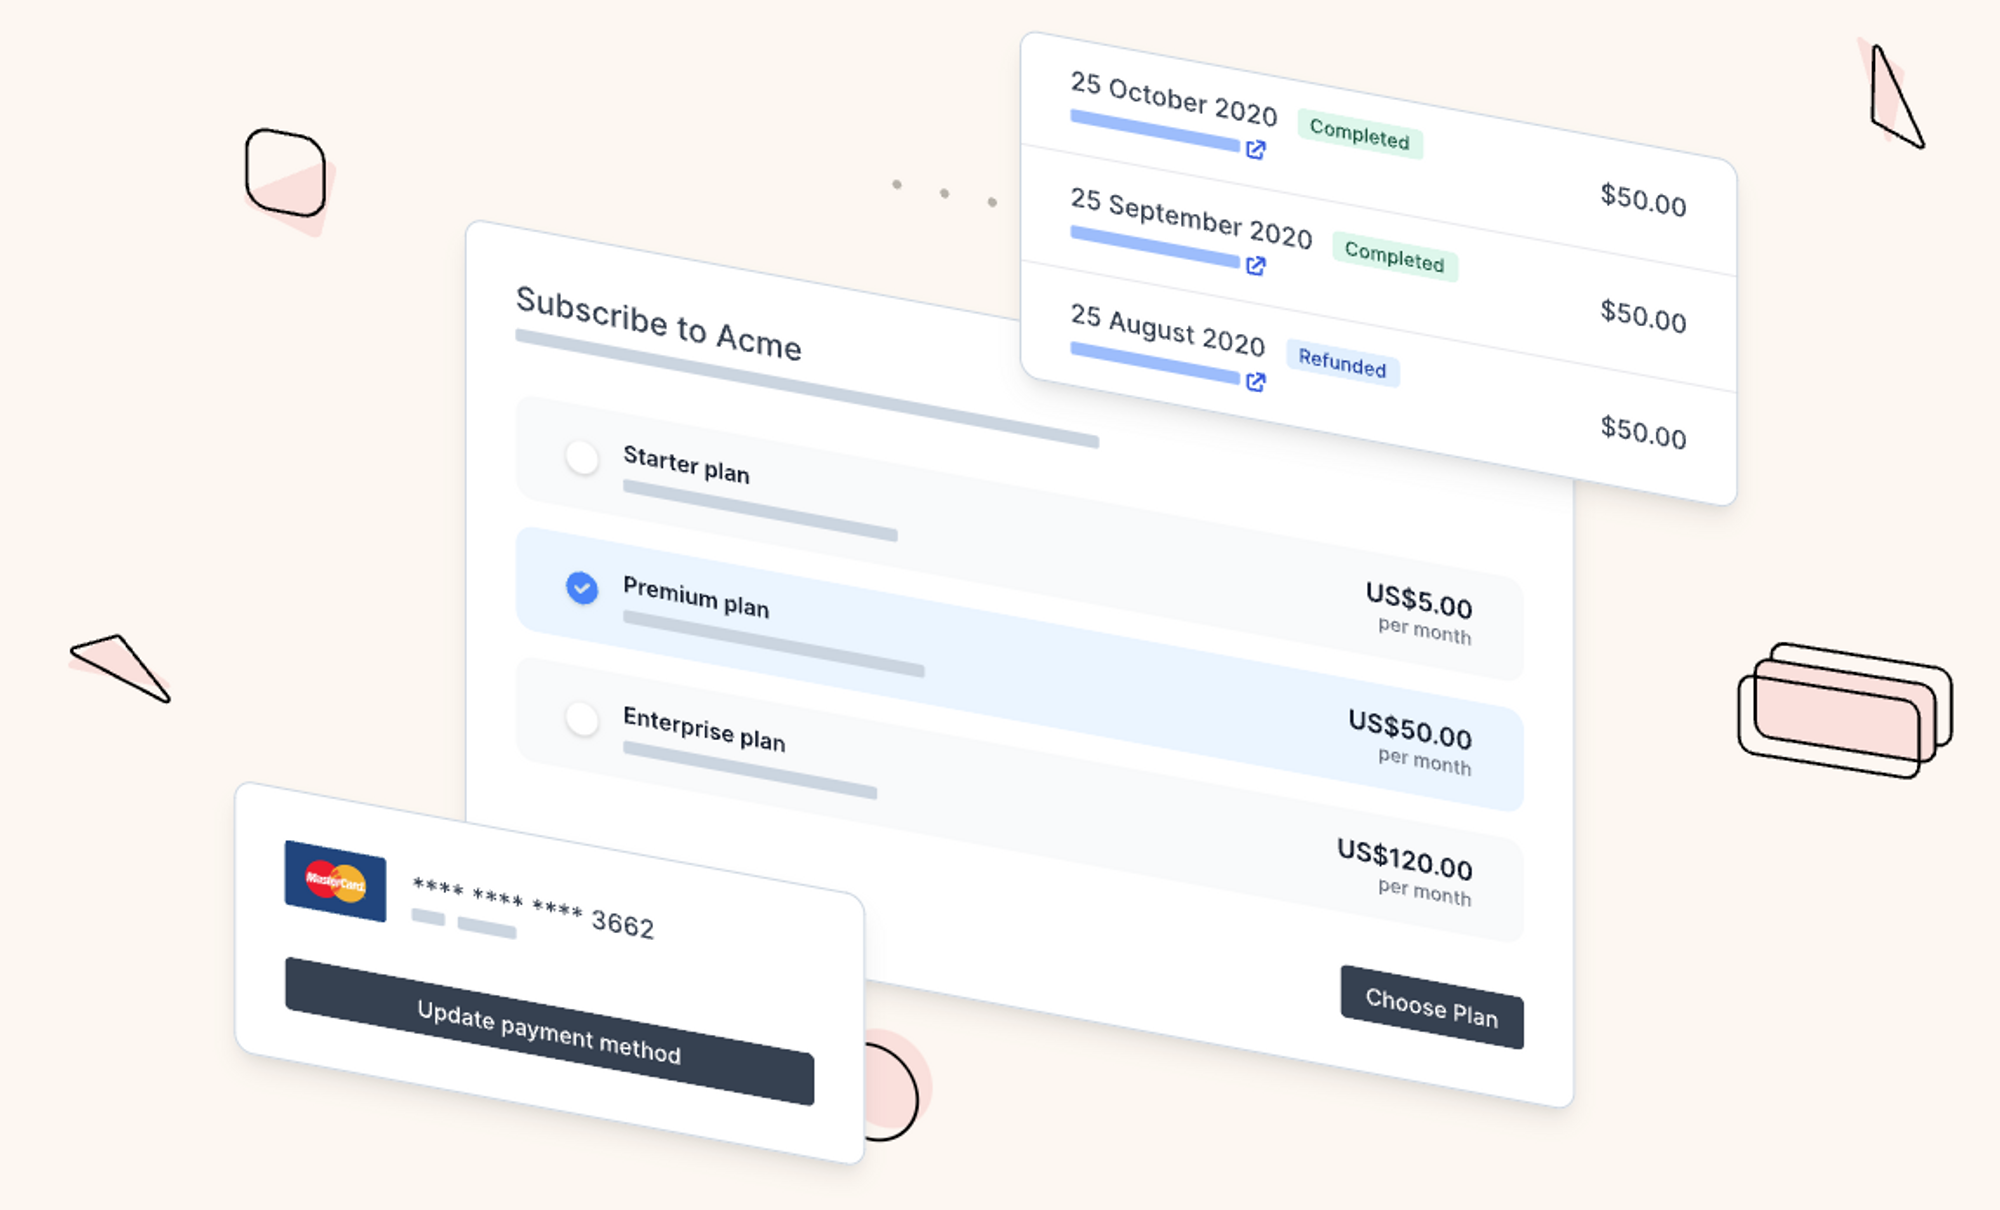 Examples of Kanuu's subscription UI. Including a Plan Selection page and Payment Method update screen.